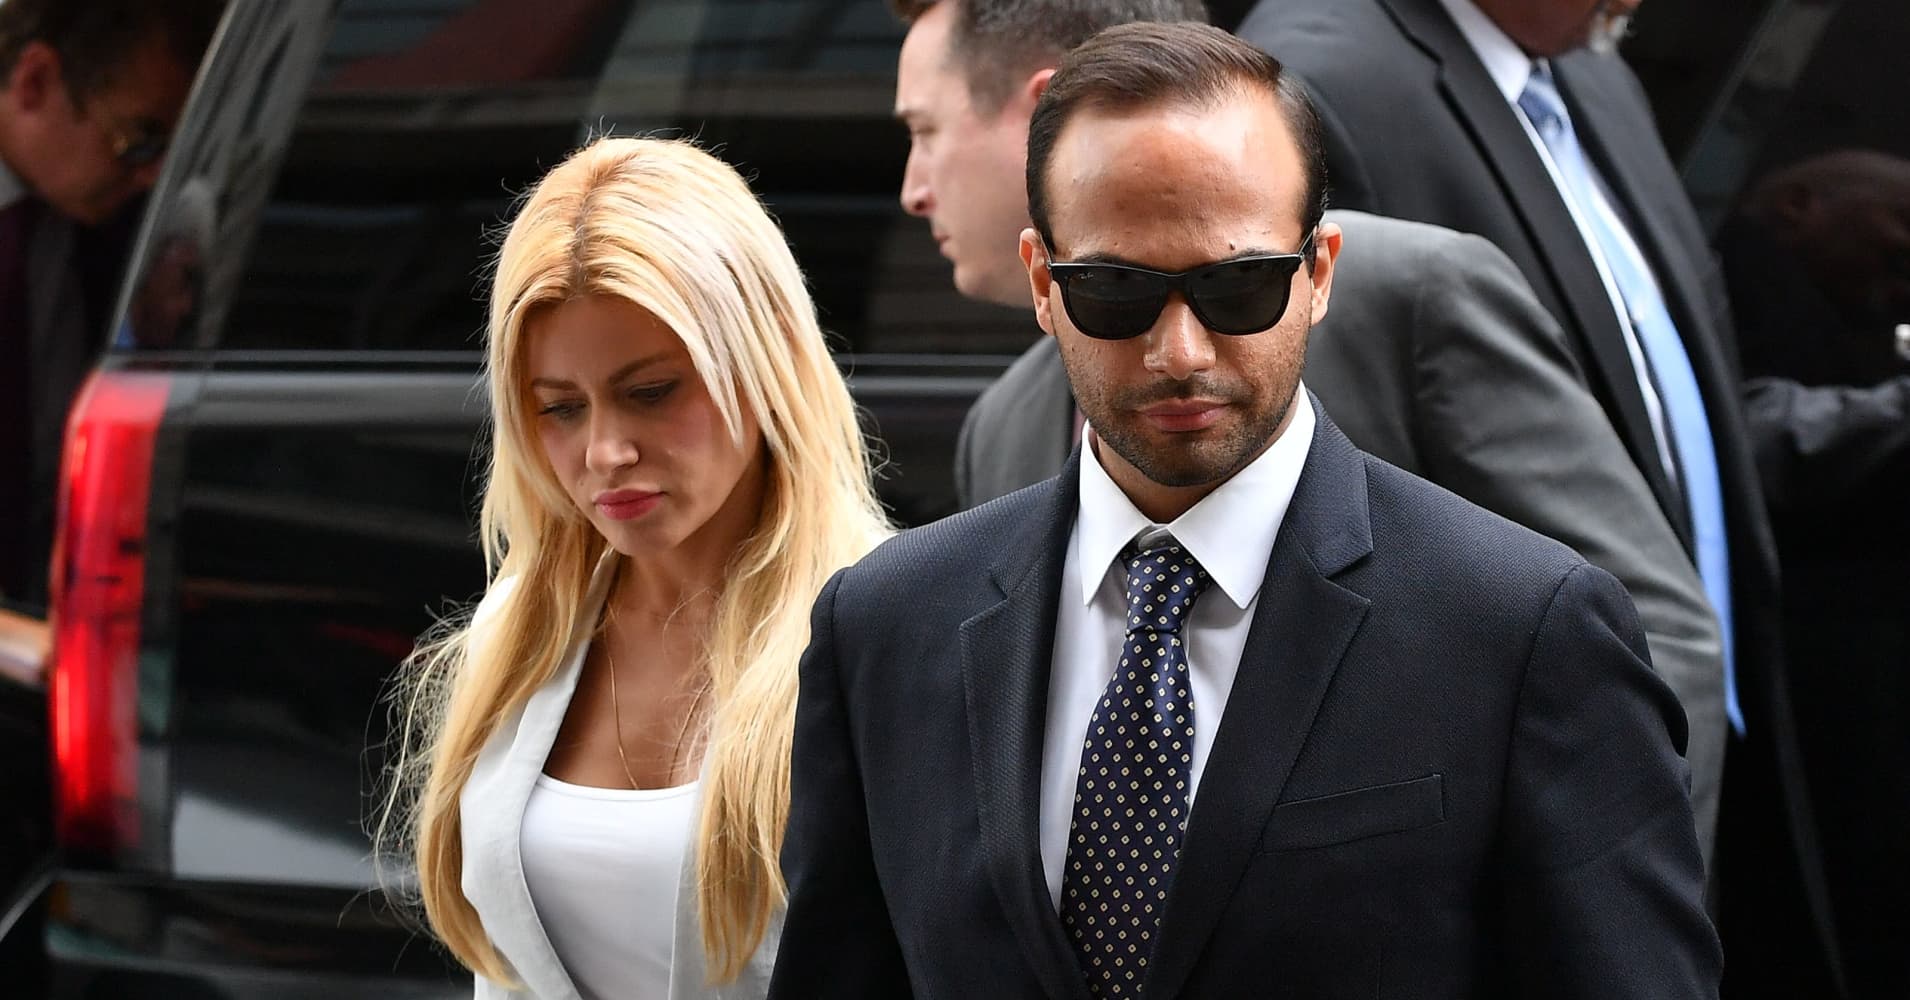 Ex-Trump campaign aide George Papadopoulos to head to prison for 14-day sentence